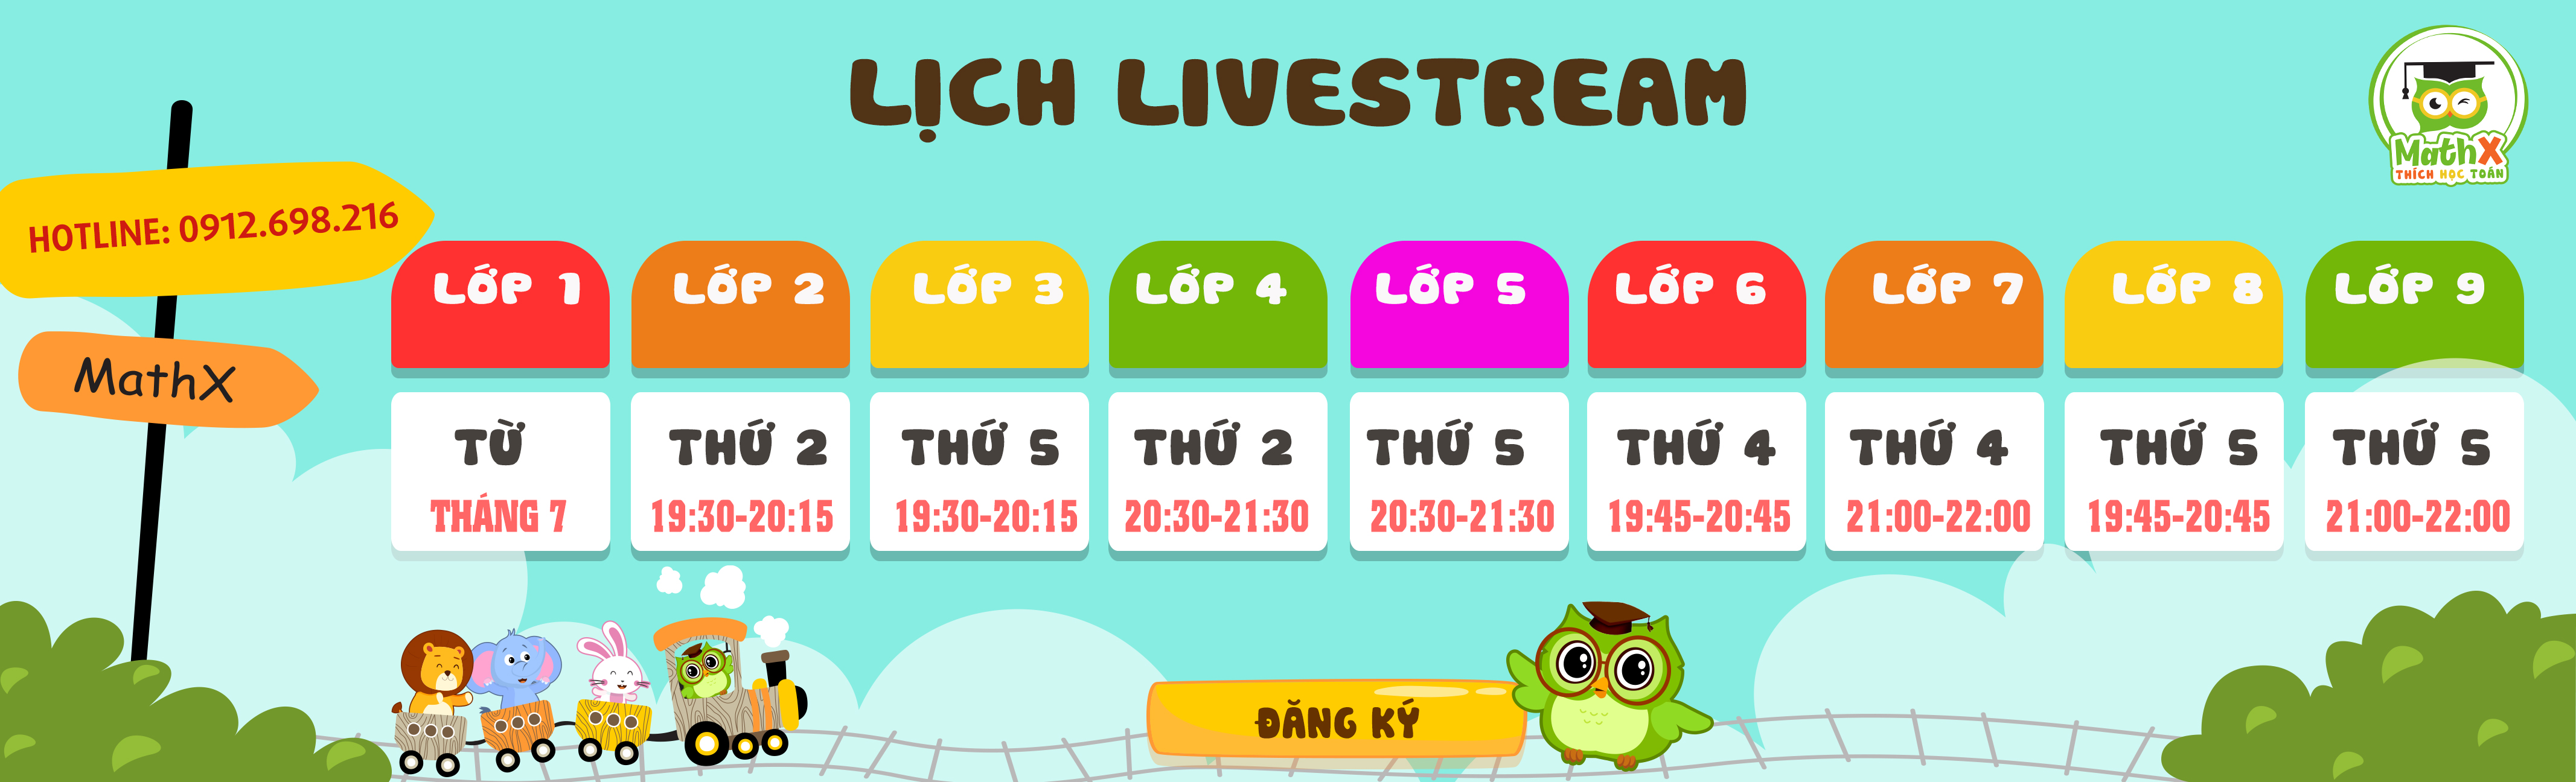 Lịch live